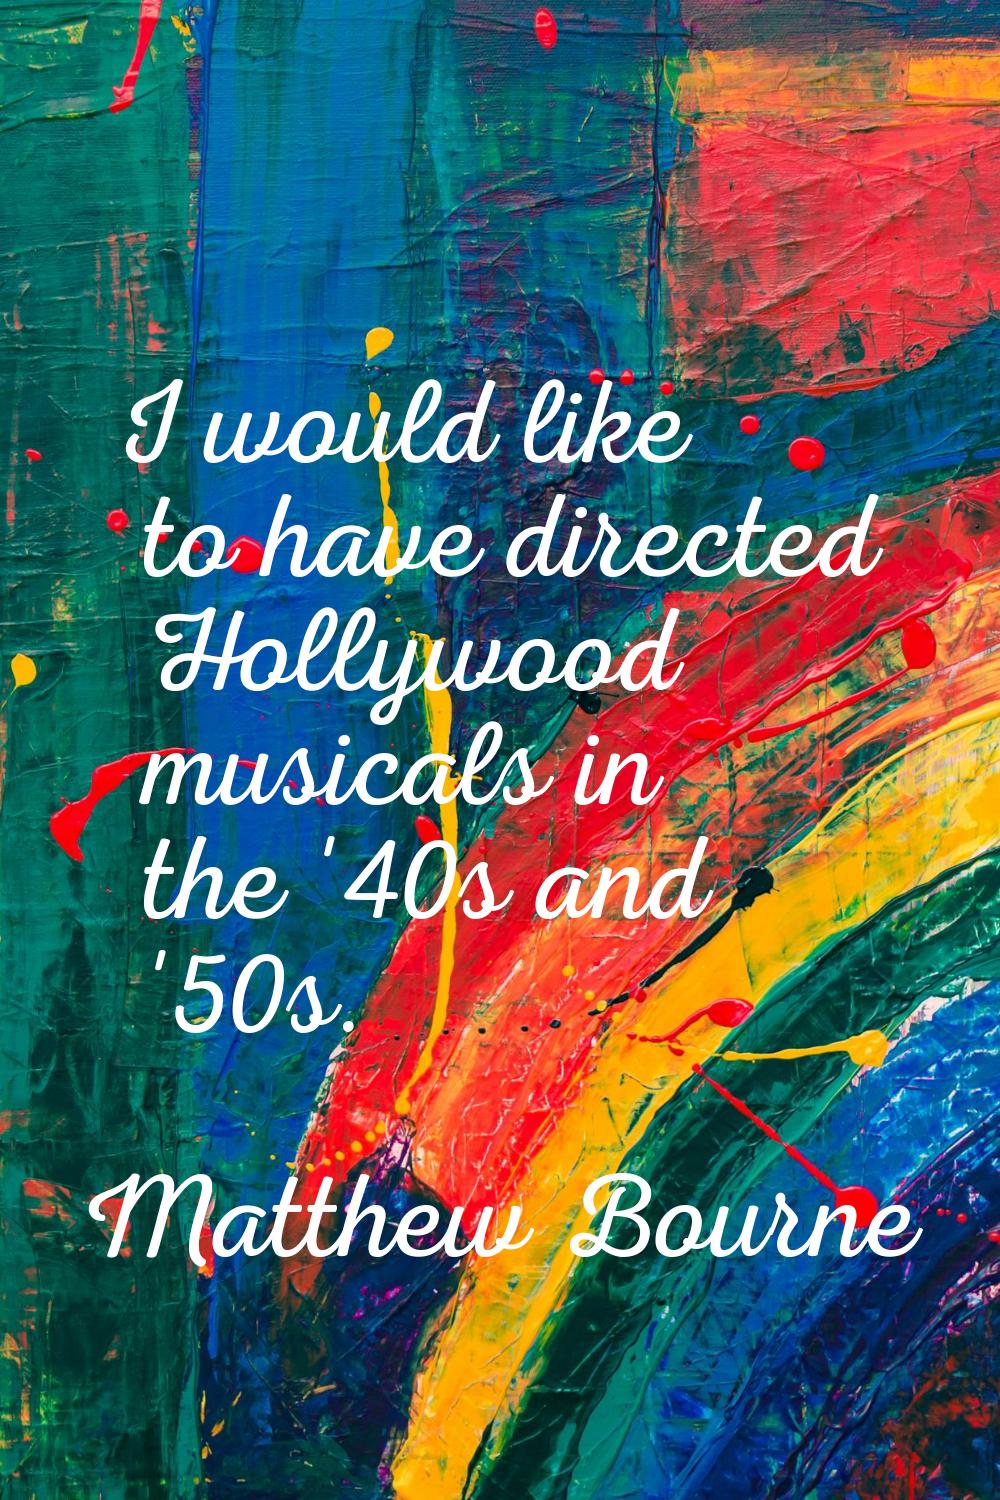 I would like to have directed Hollywood musicals in the '40s and '50s.